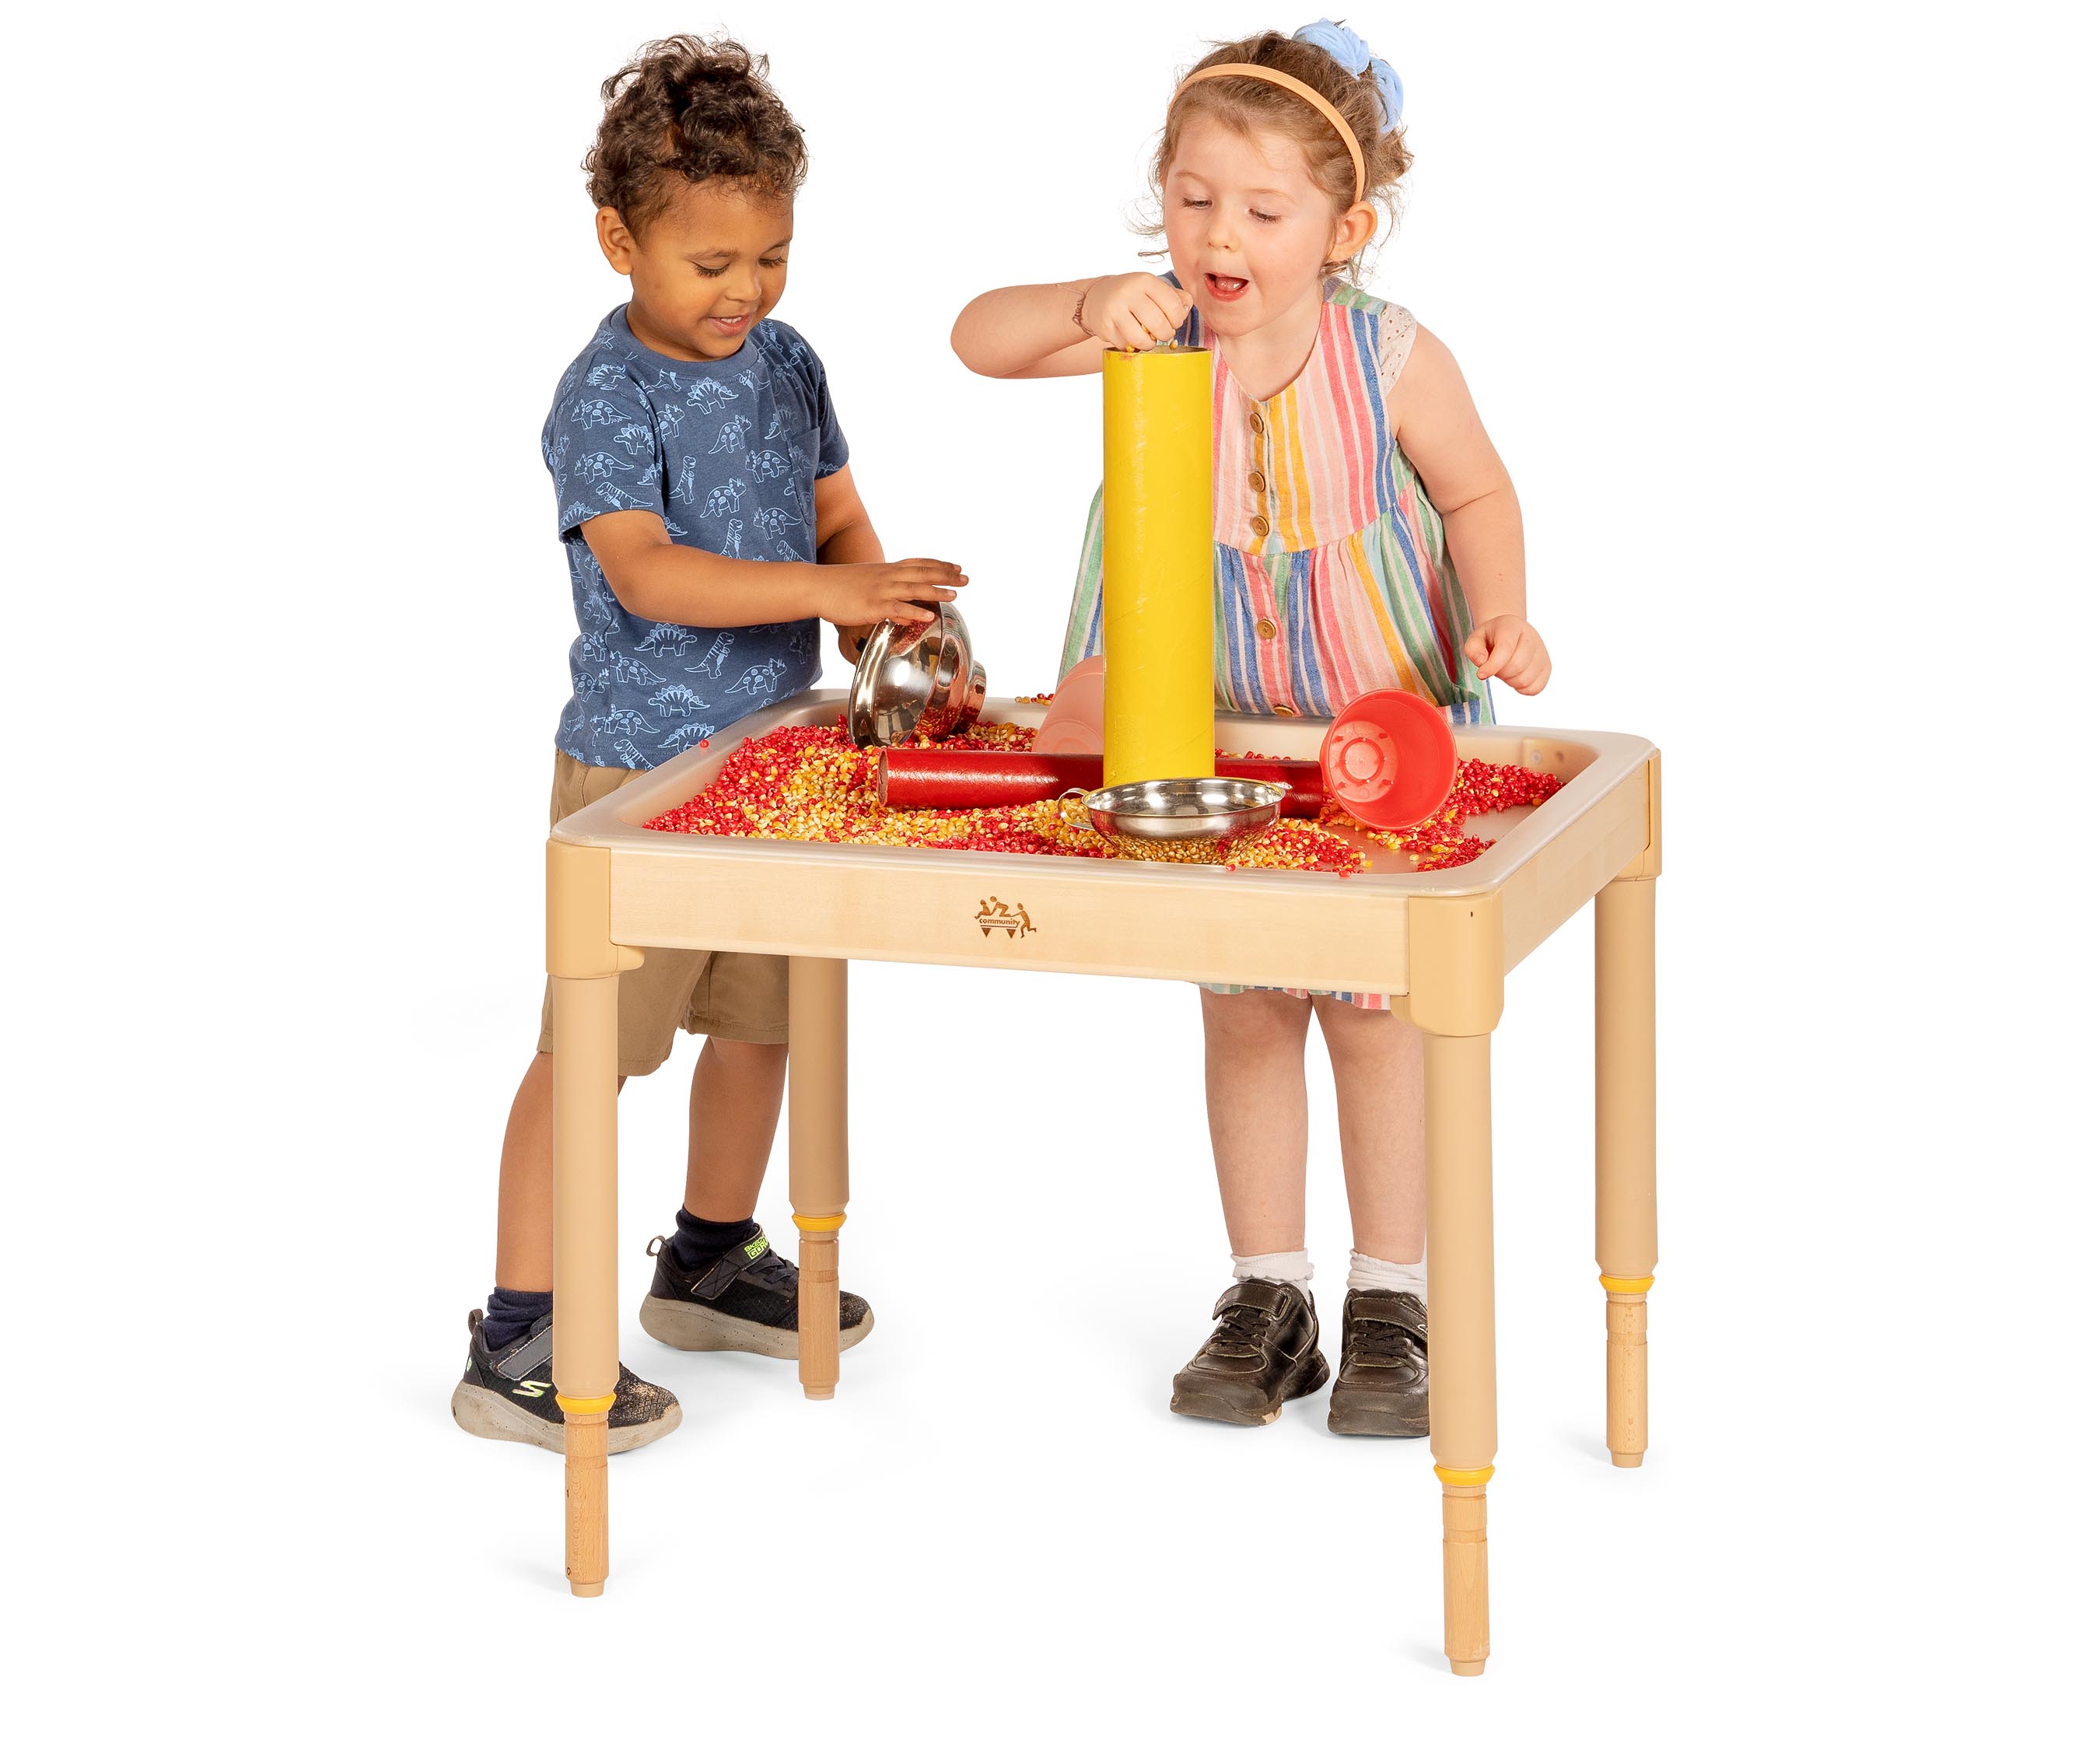 A toddler girl and boy playing with sensory material in the Activity tray.